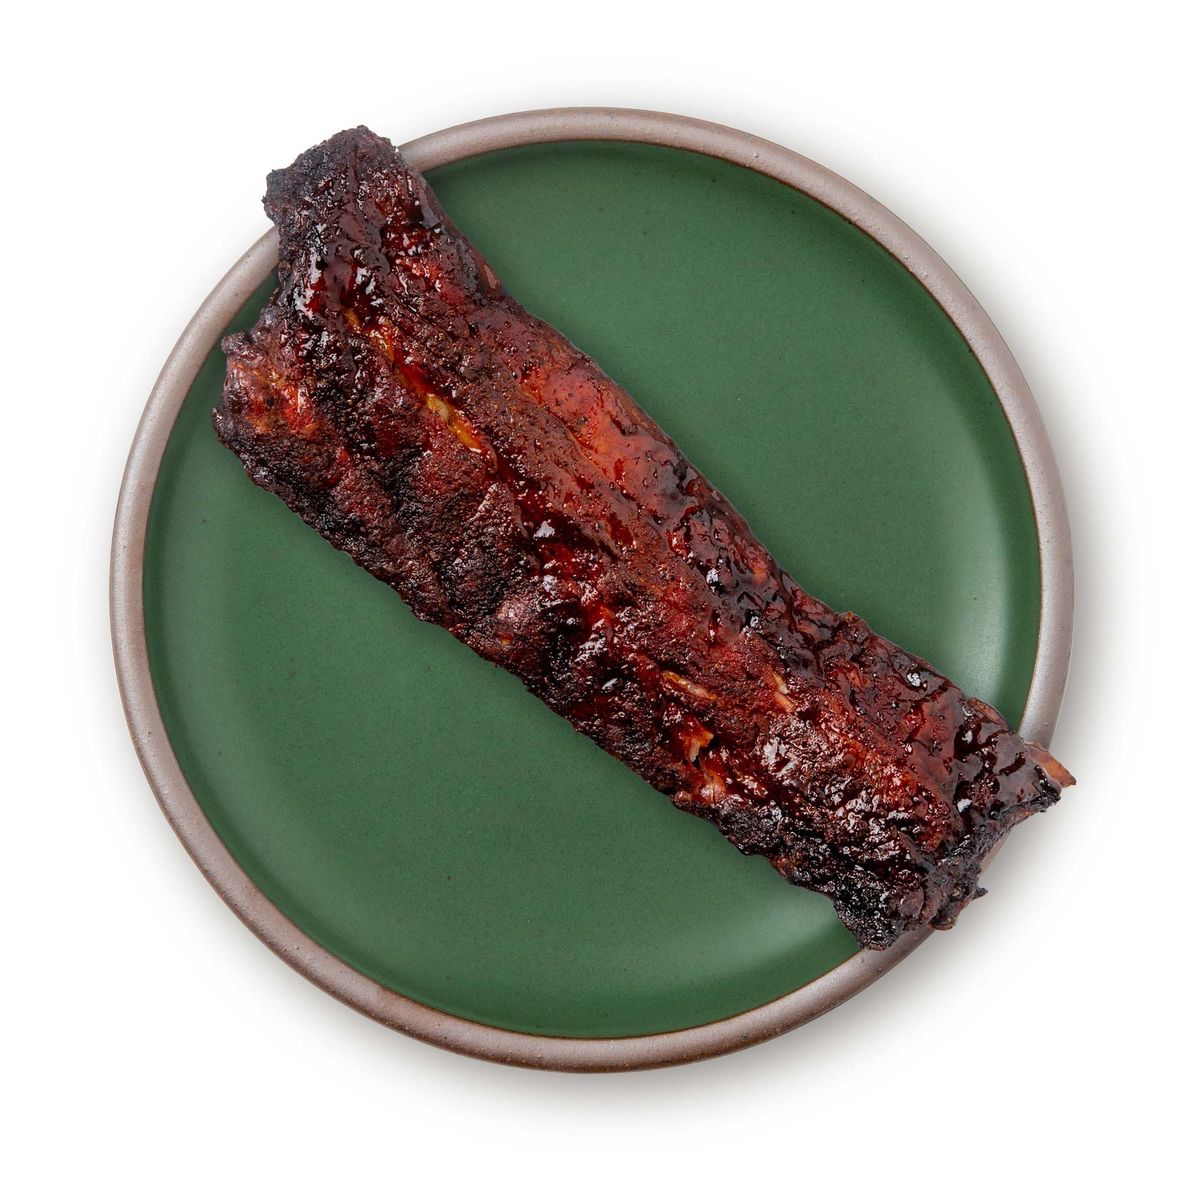 A rack of ribs on a large ceramic platter in a deep, verdant green color featuring iron speckles and an unglazed rim